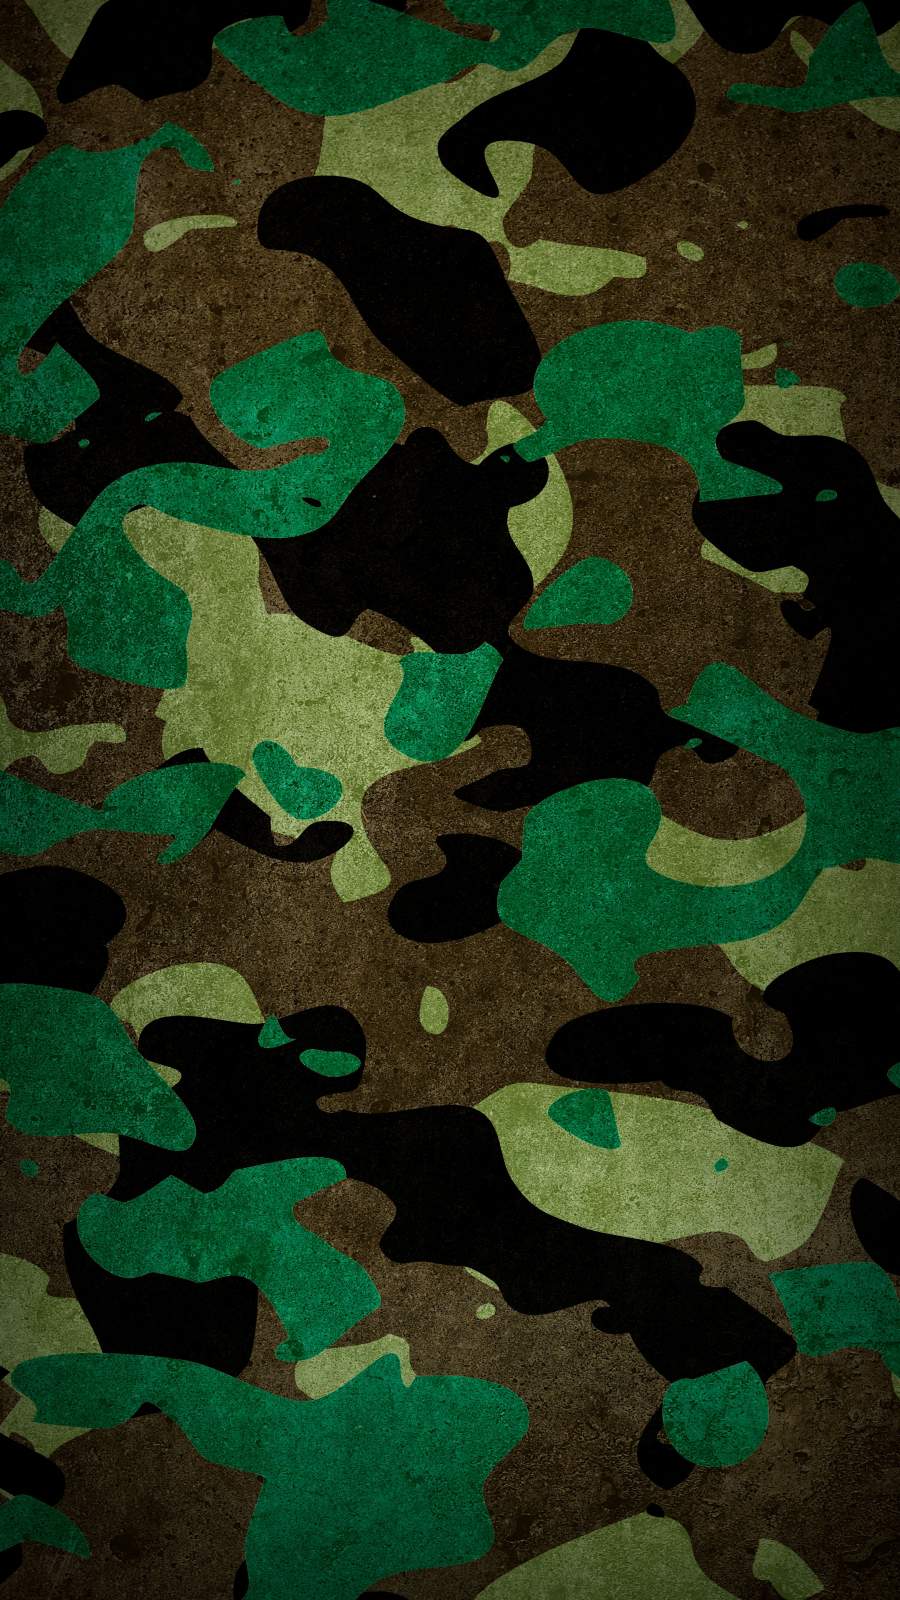 Army Camouflage IPhone Wallpaper - IPhone Wallpapers : iPhone Wallpapers